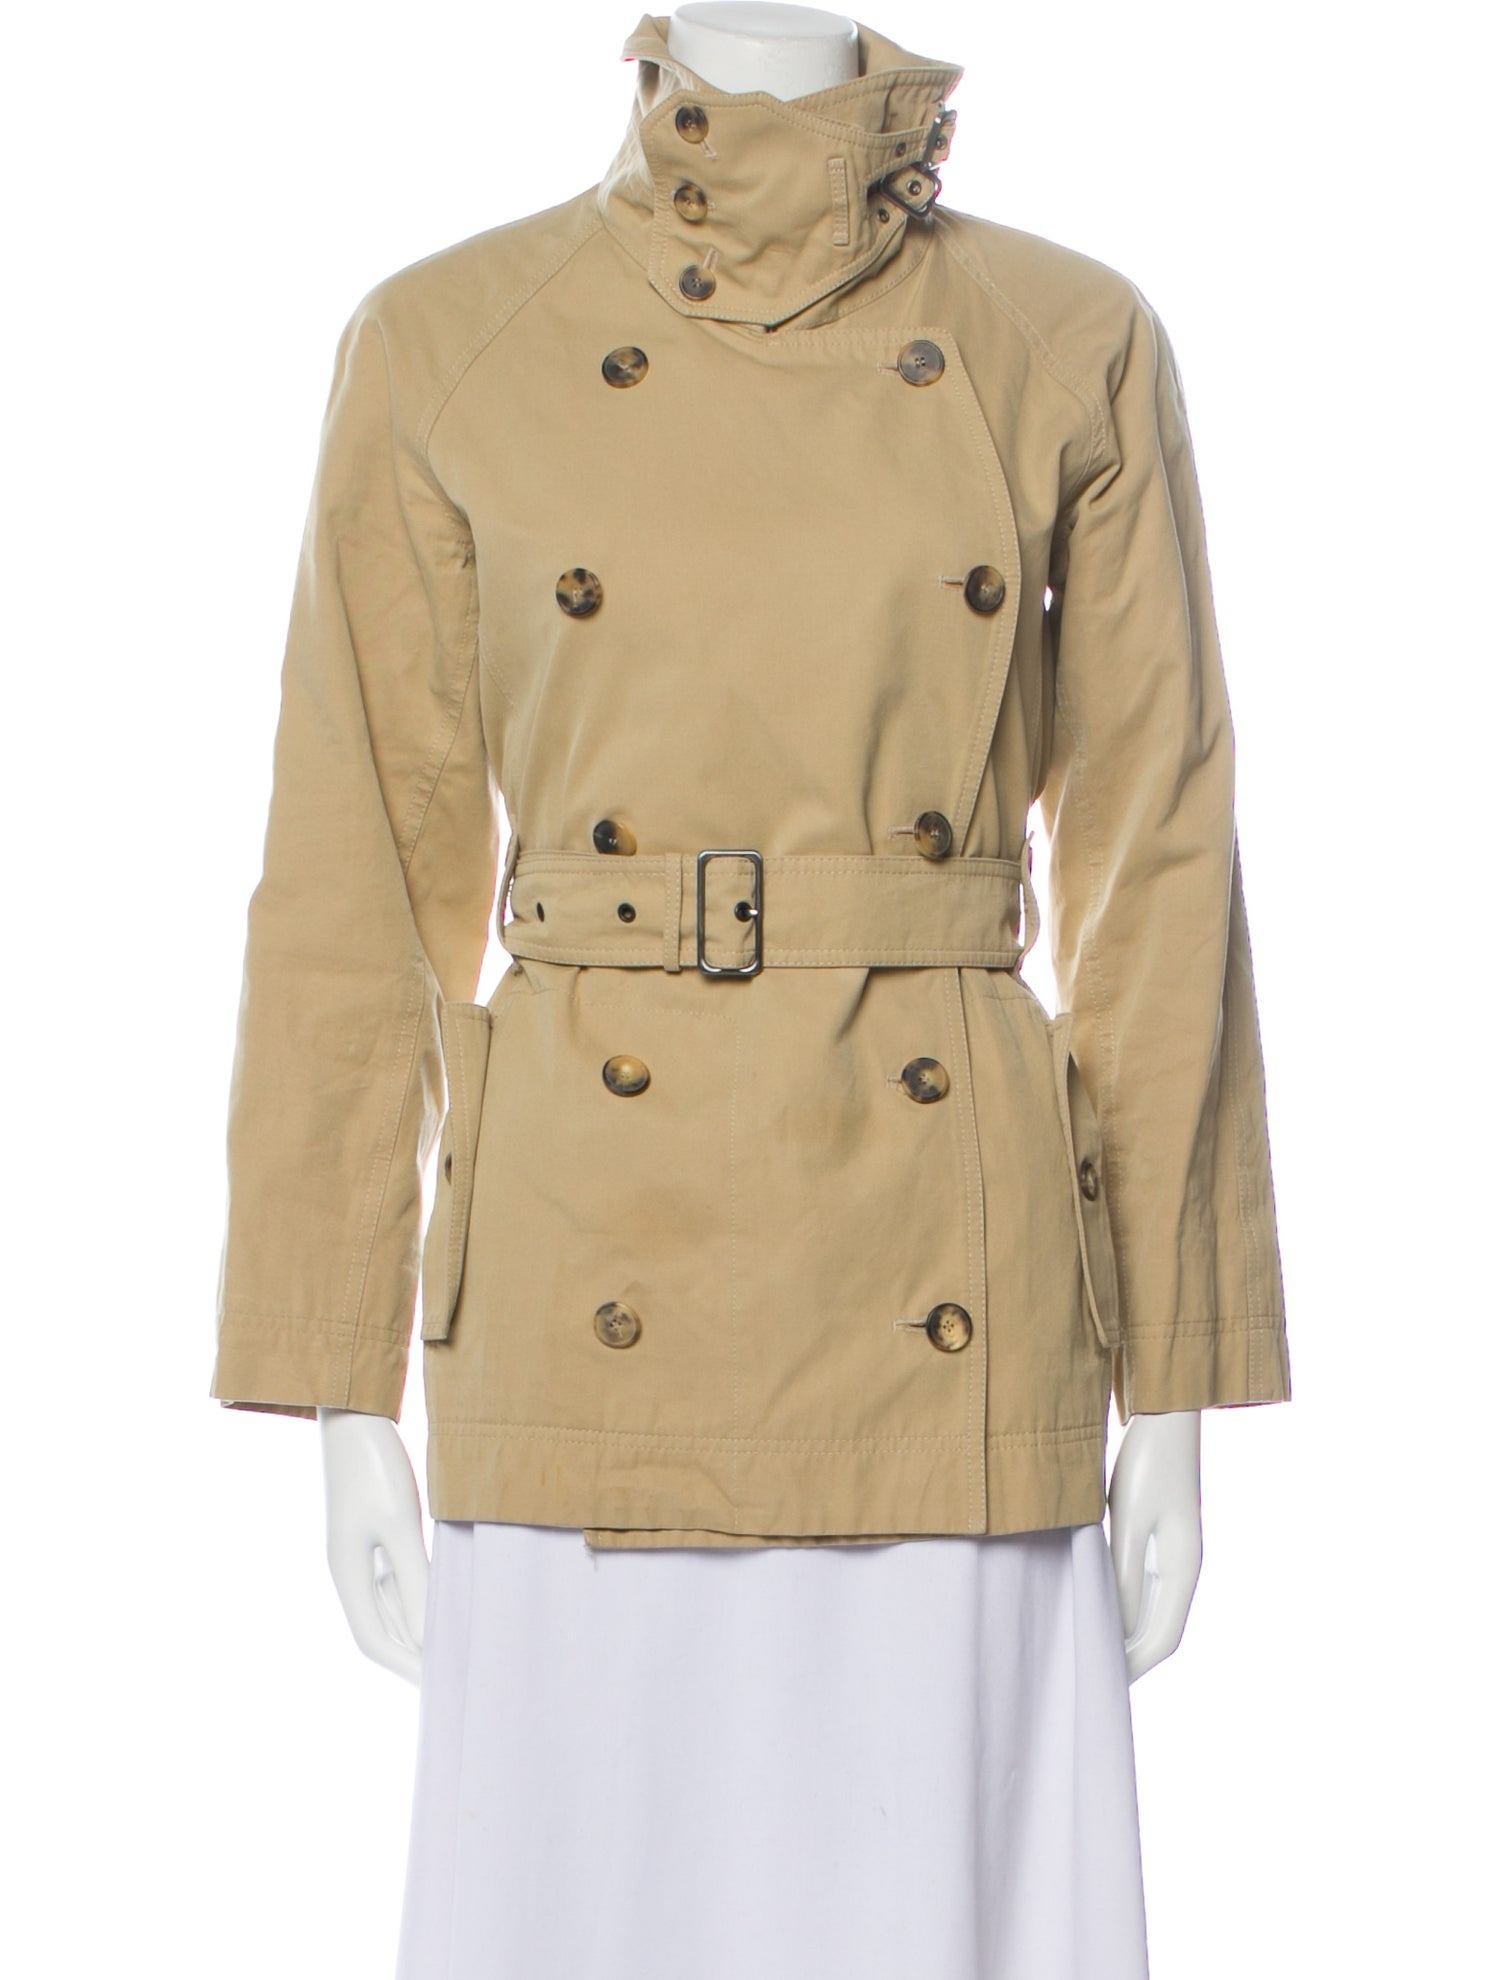 Vintage Yves Saint Laurent cropped trench coat